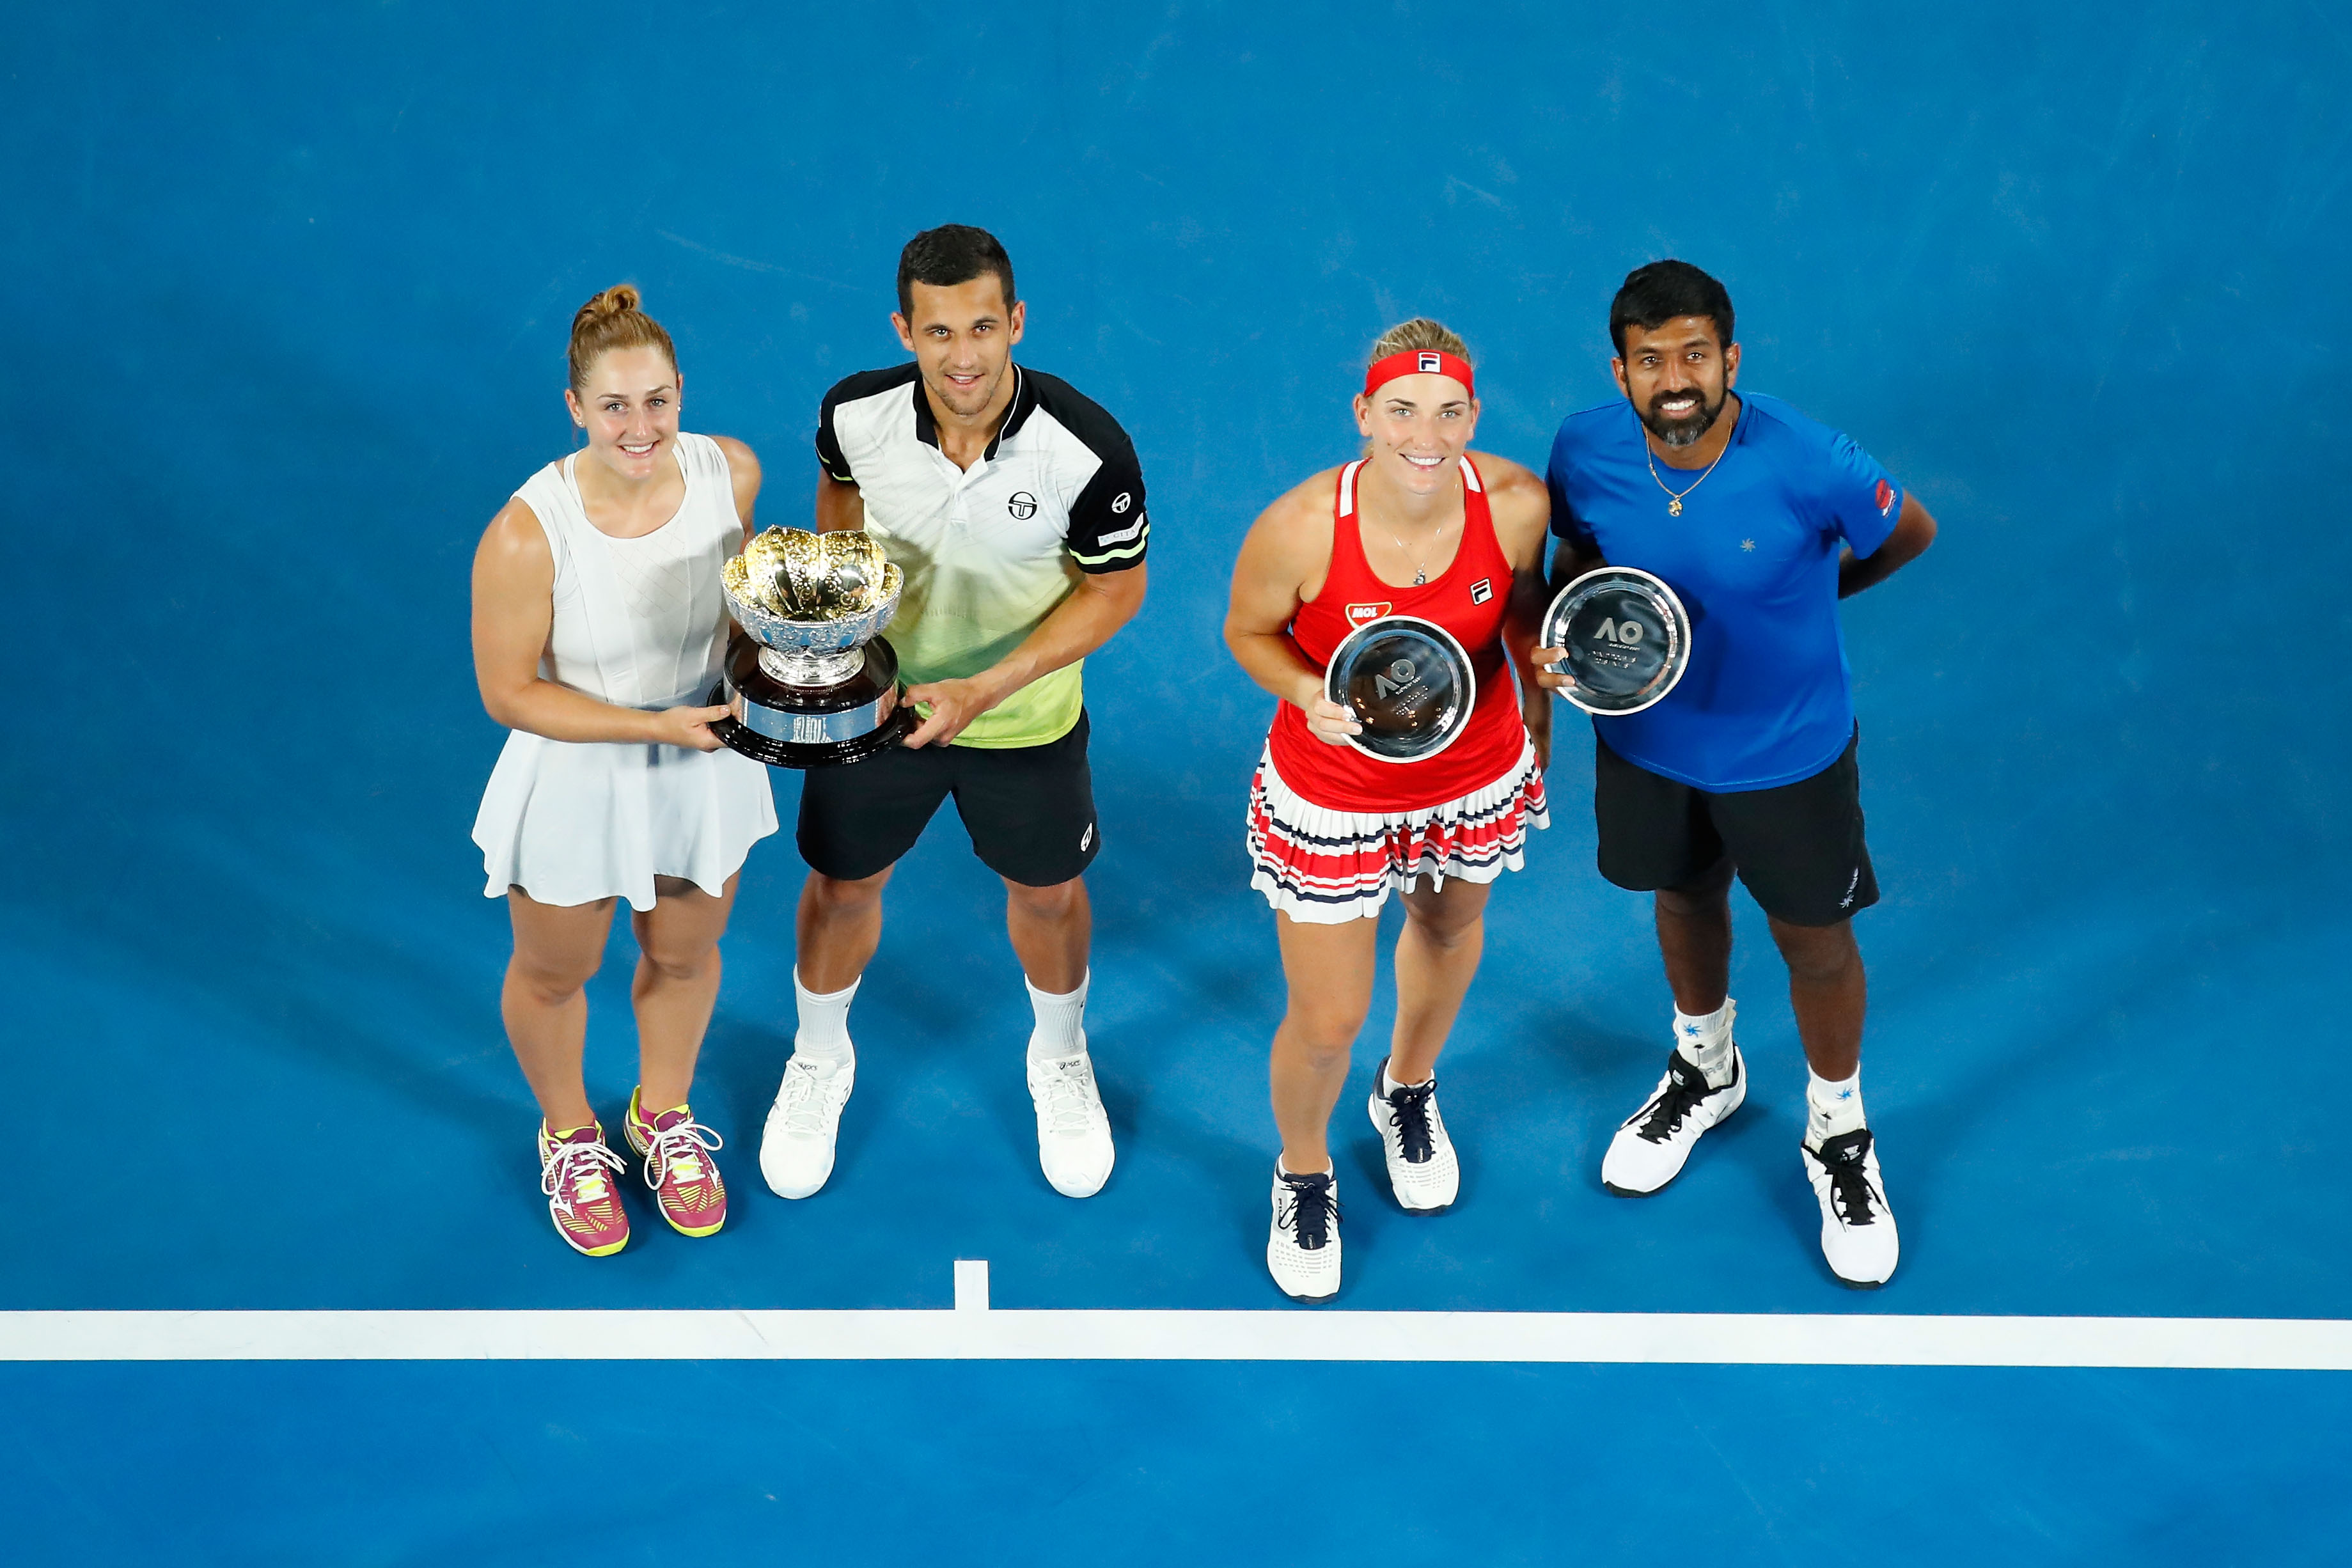 Rohan Bopanna and Timea Barbosa lose in Australian Open mixed doubles finals